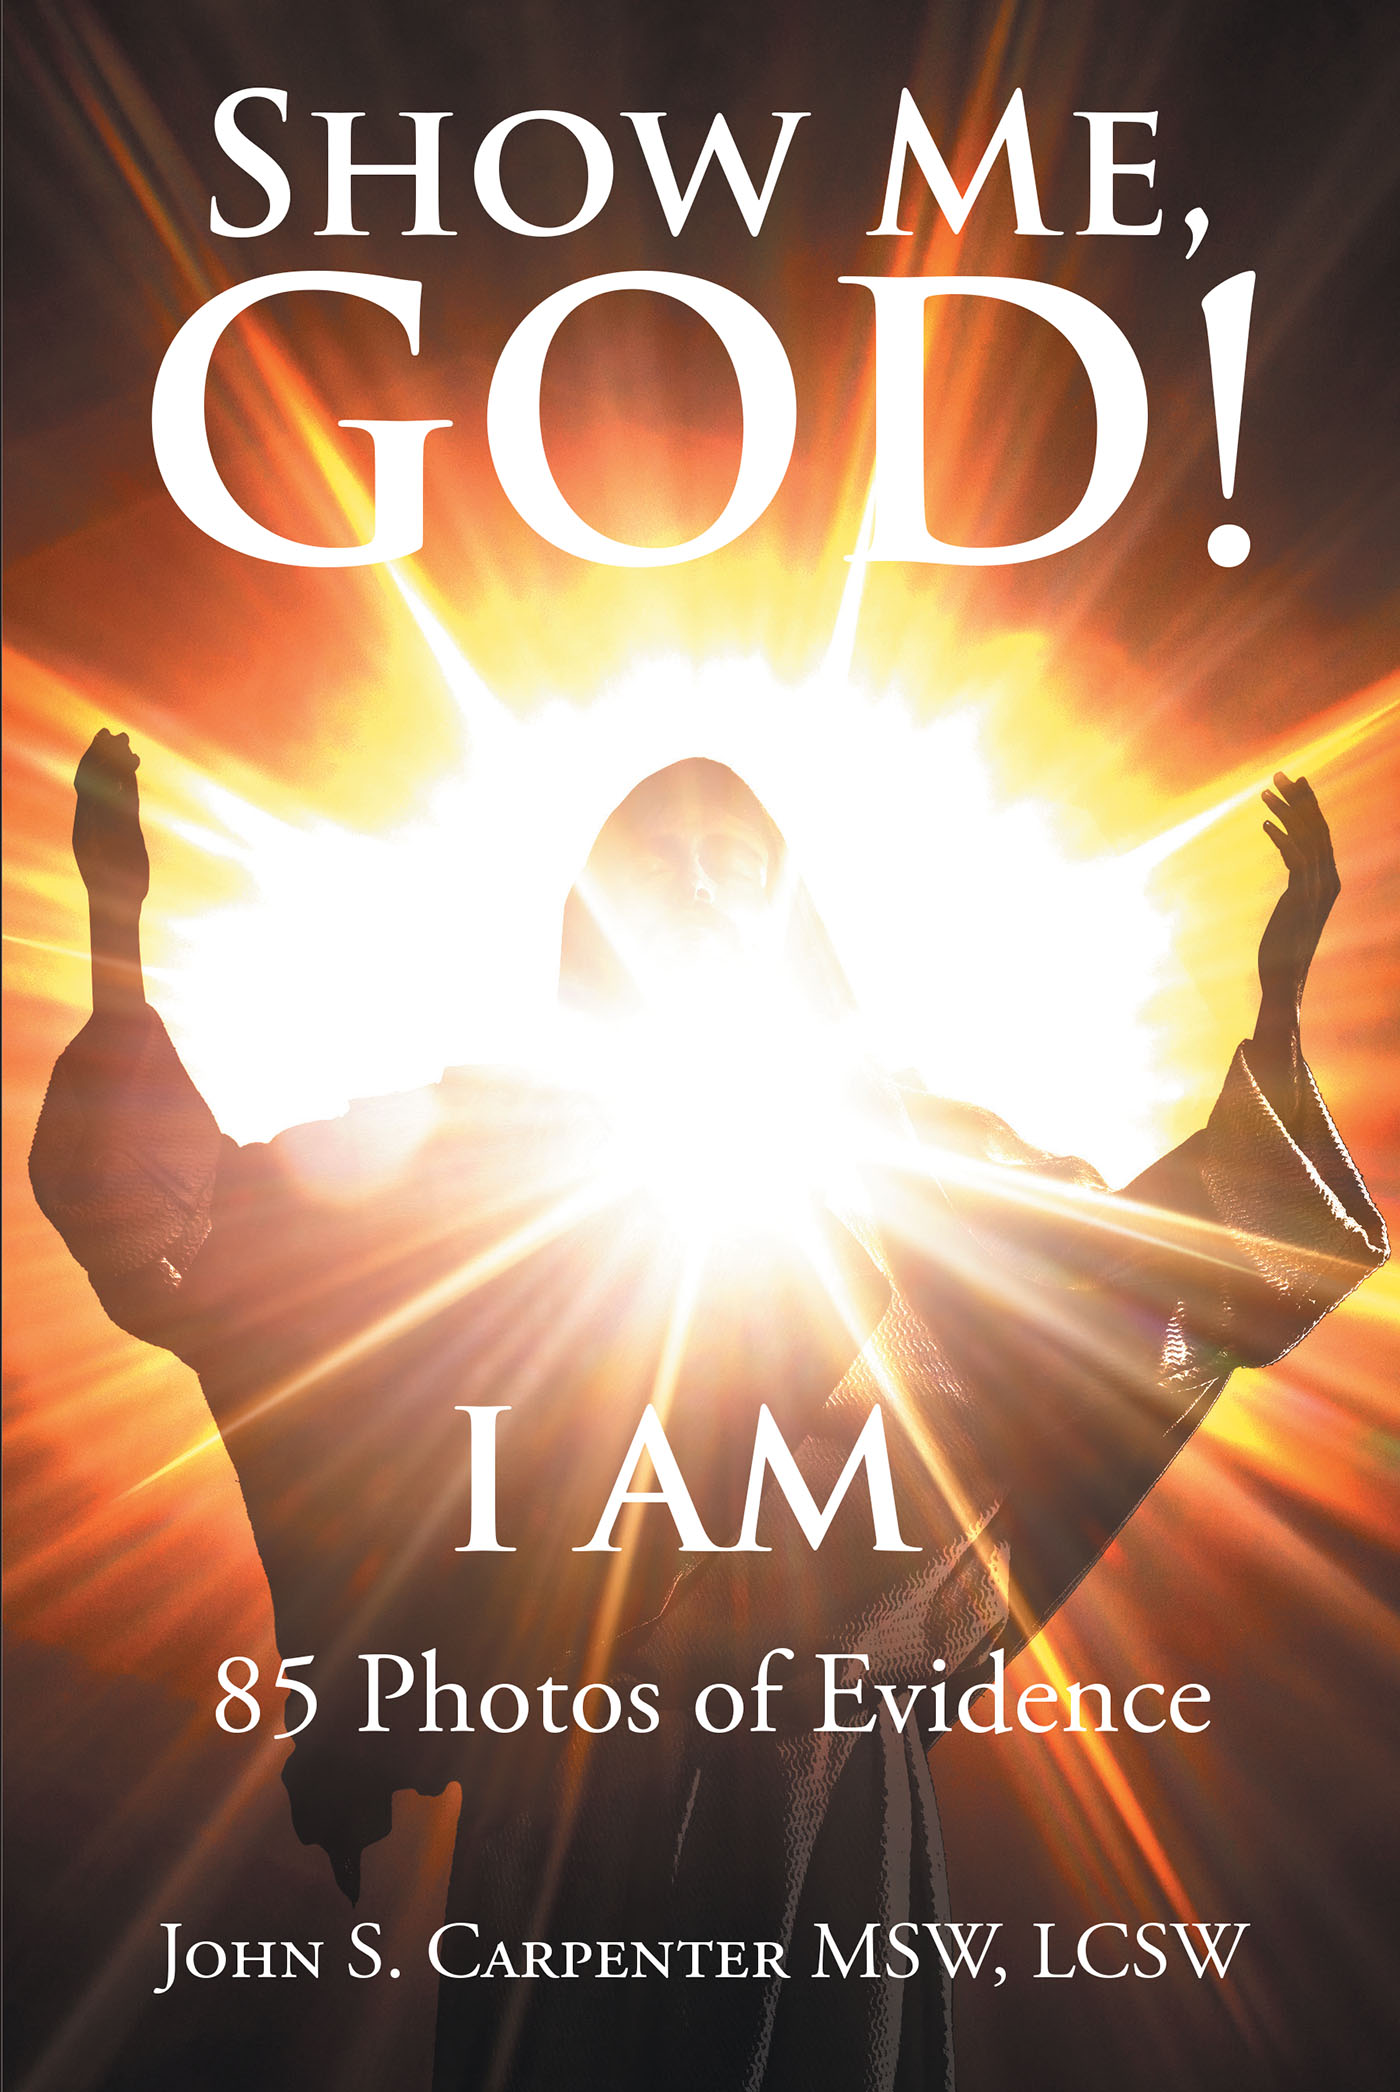 Author John S. Carpenter MSW, LCSW’s New Book, "Show Me, God! I AM," Discusses the Available Evidence and Scientific Facts That Help to Prove God's Love and Existence